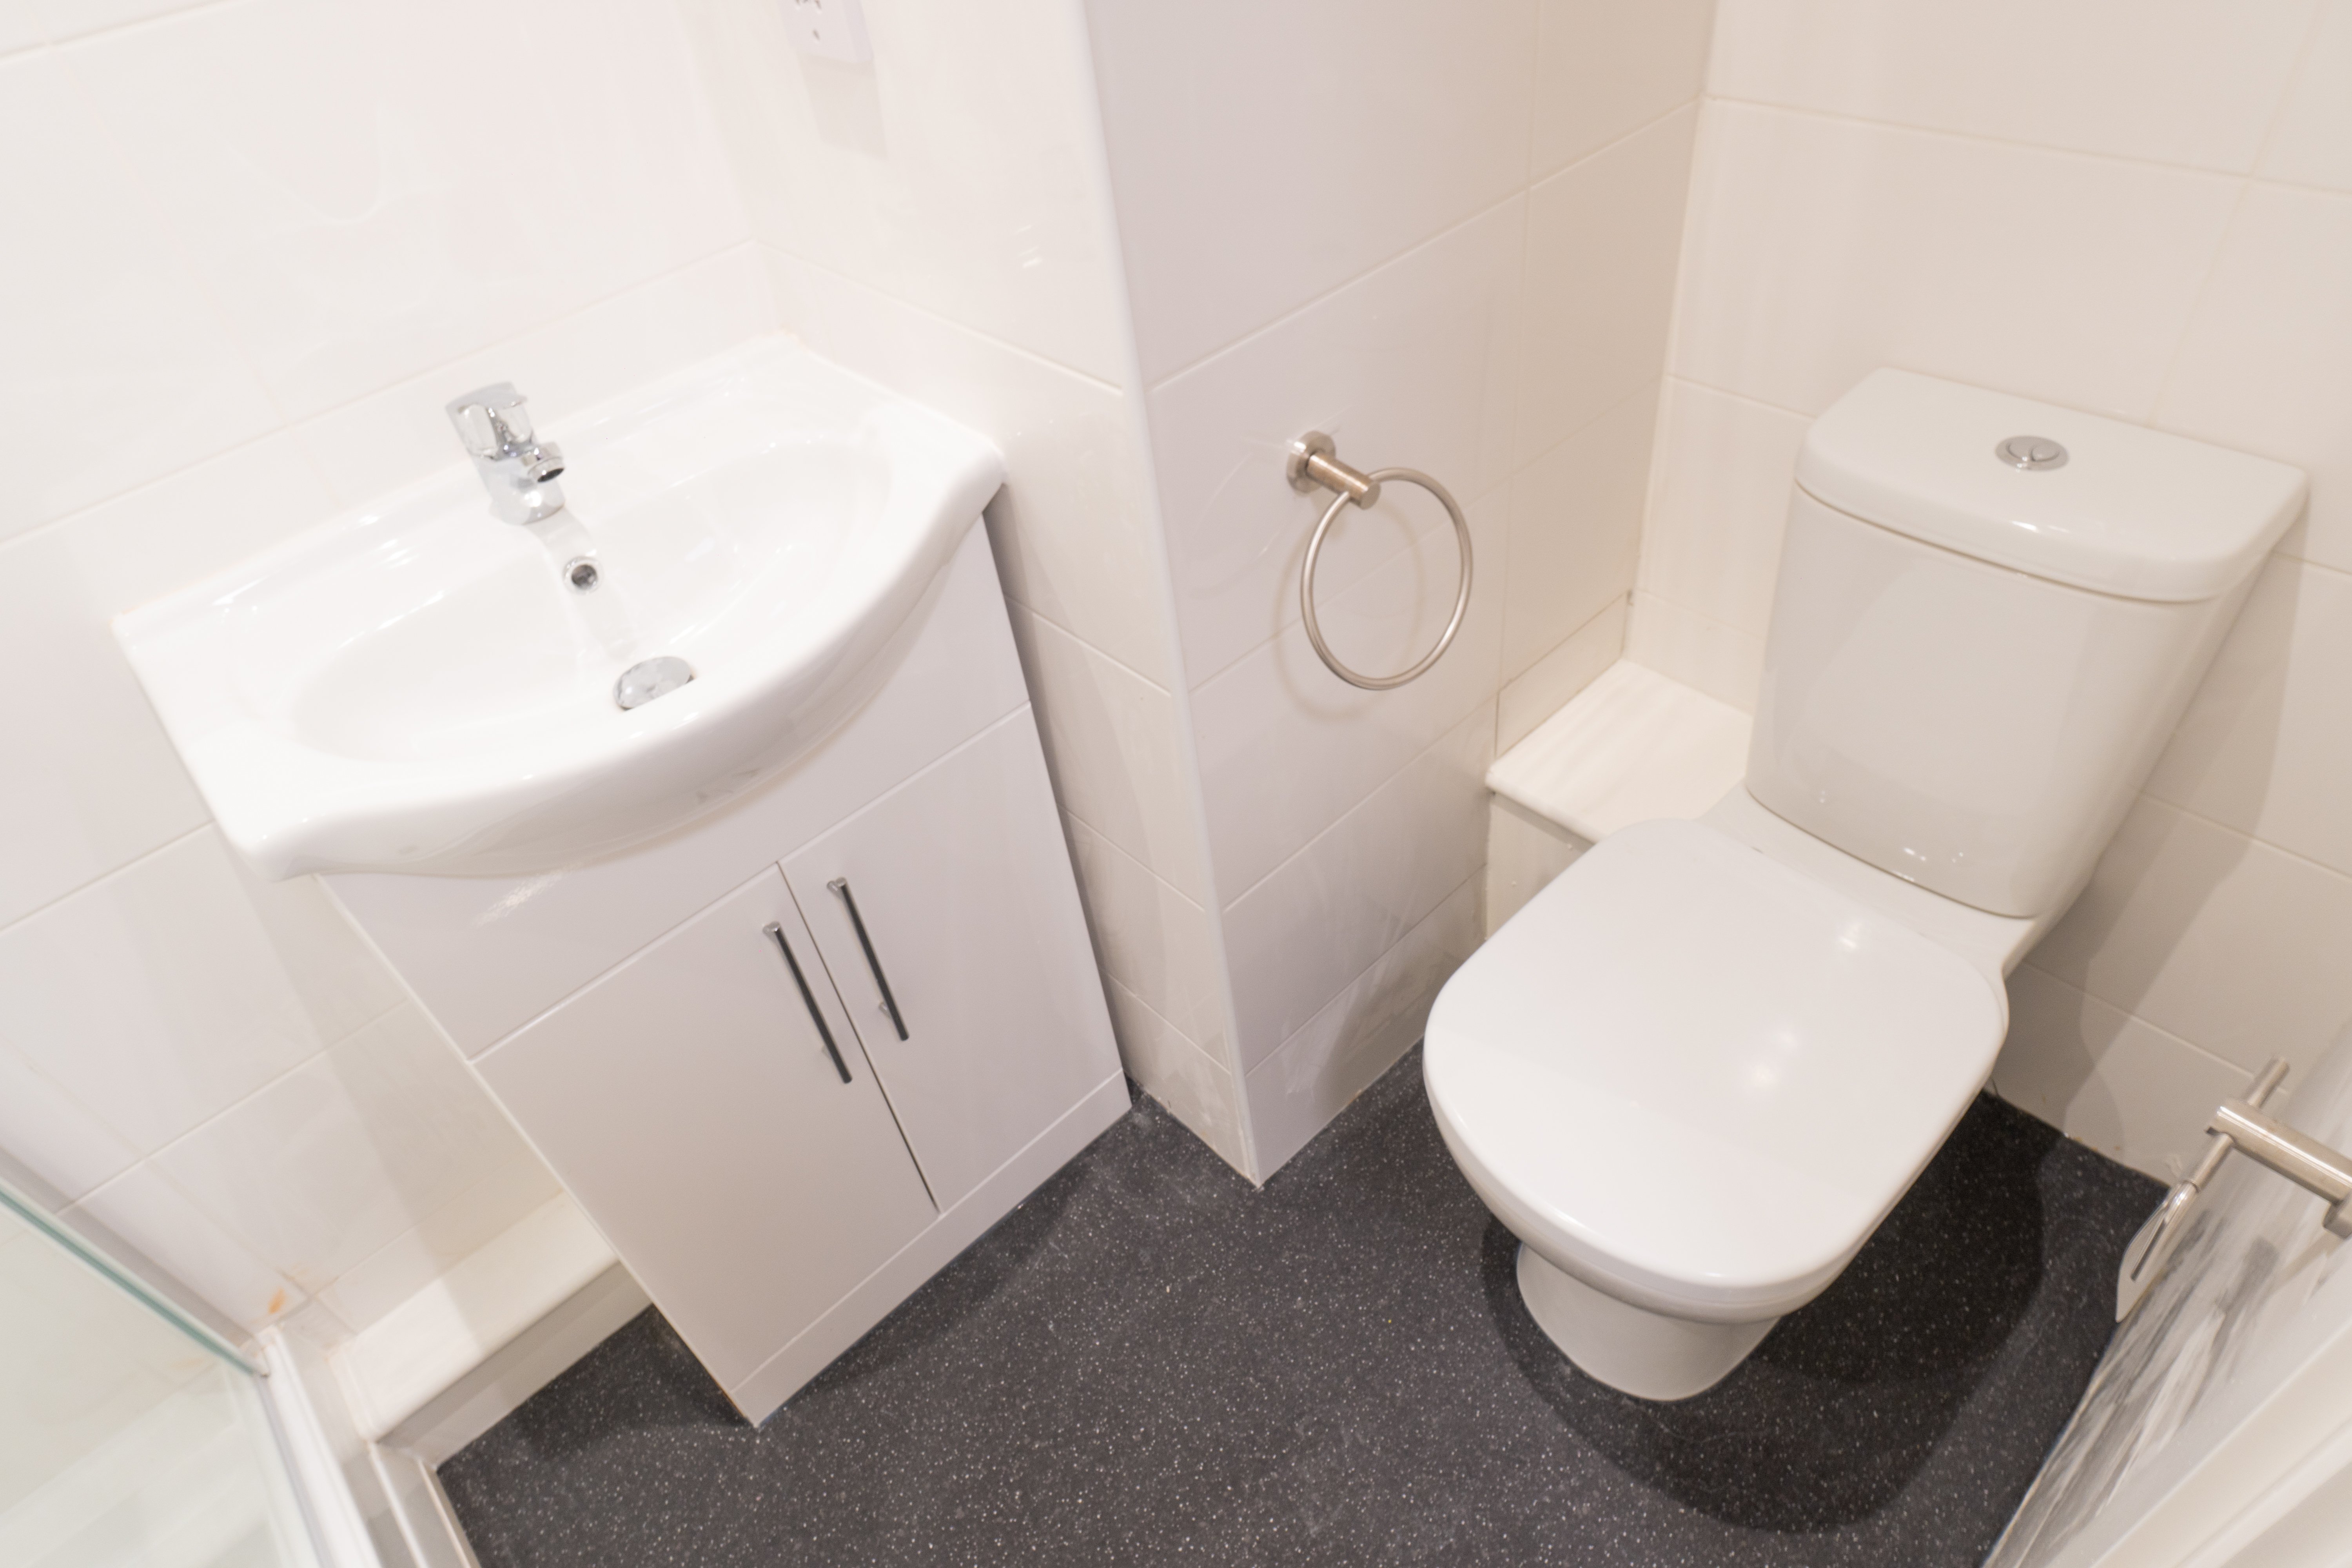 top view of a small bathroom with white sink and toilet. the floors are in grey tiles